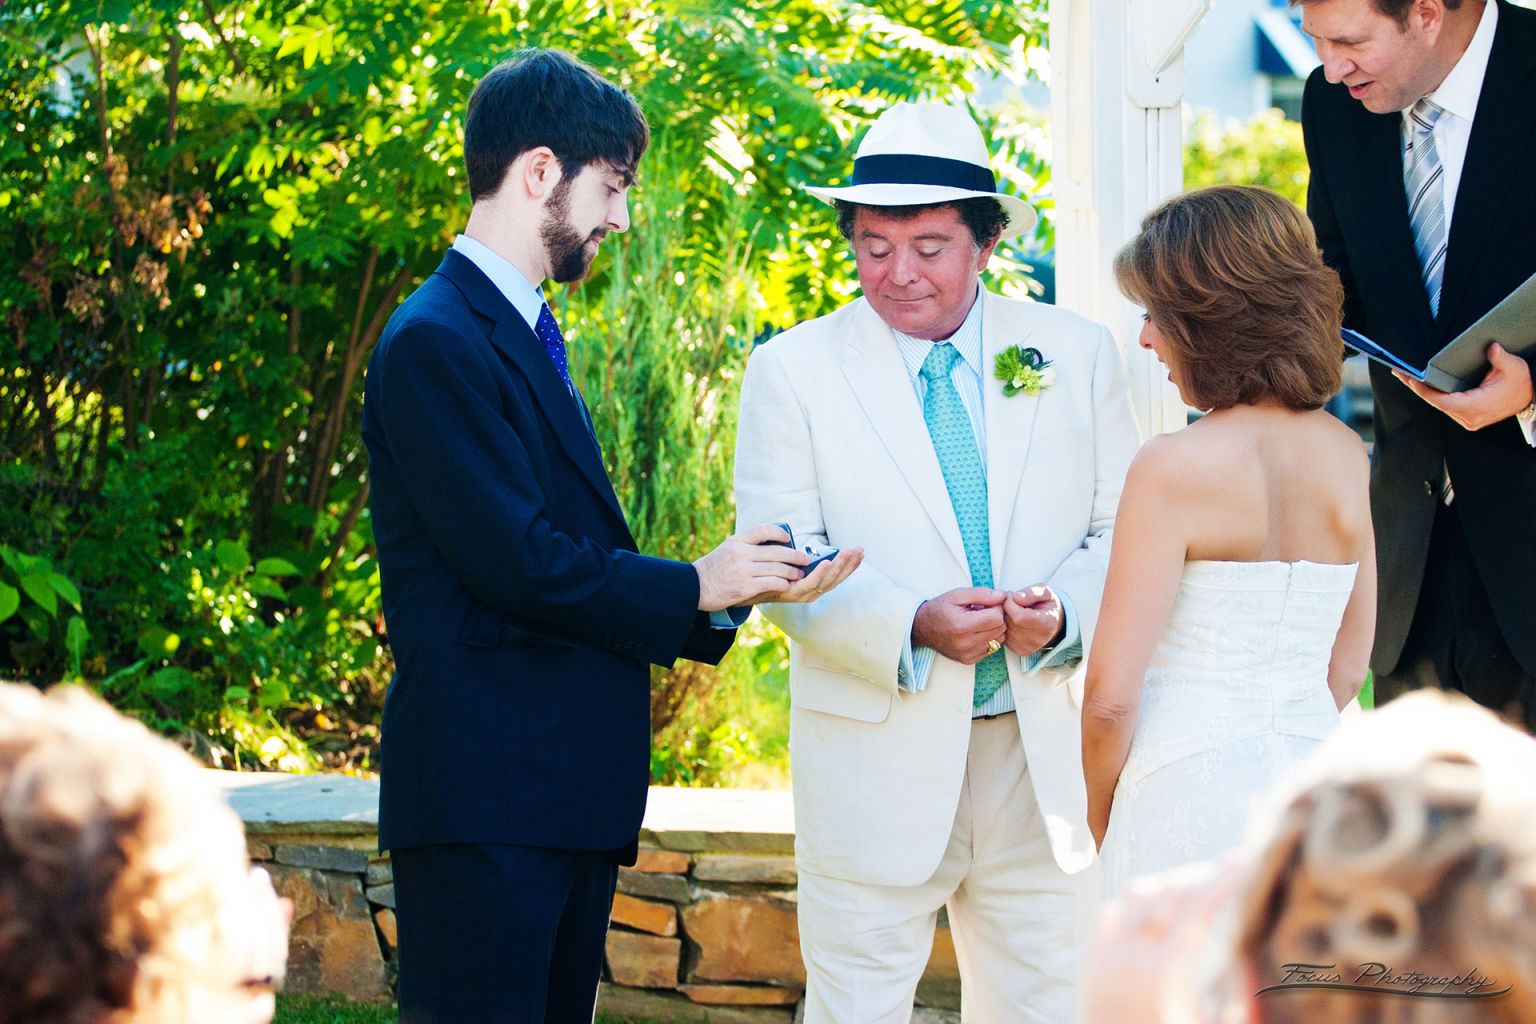 Presenting ring to bride and groom at Maine wedding